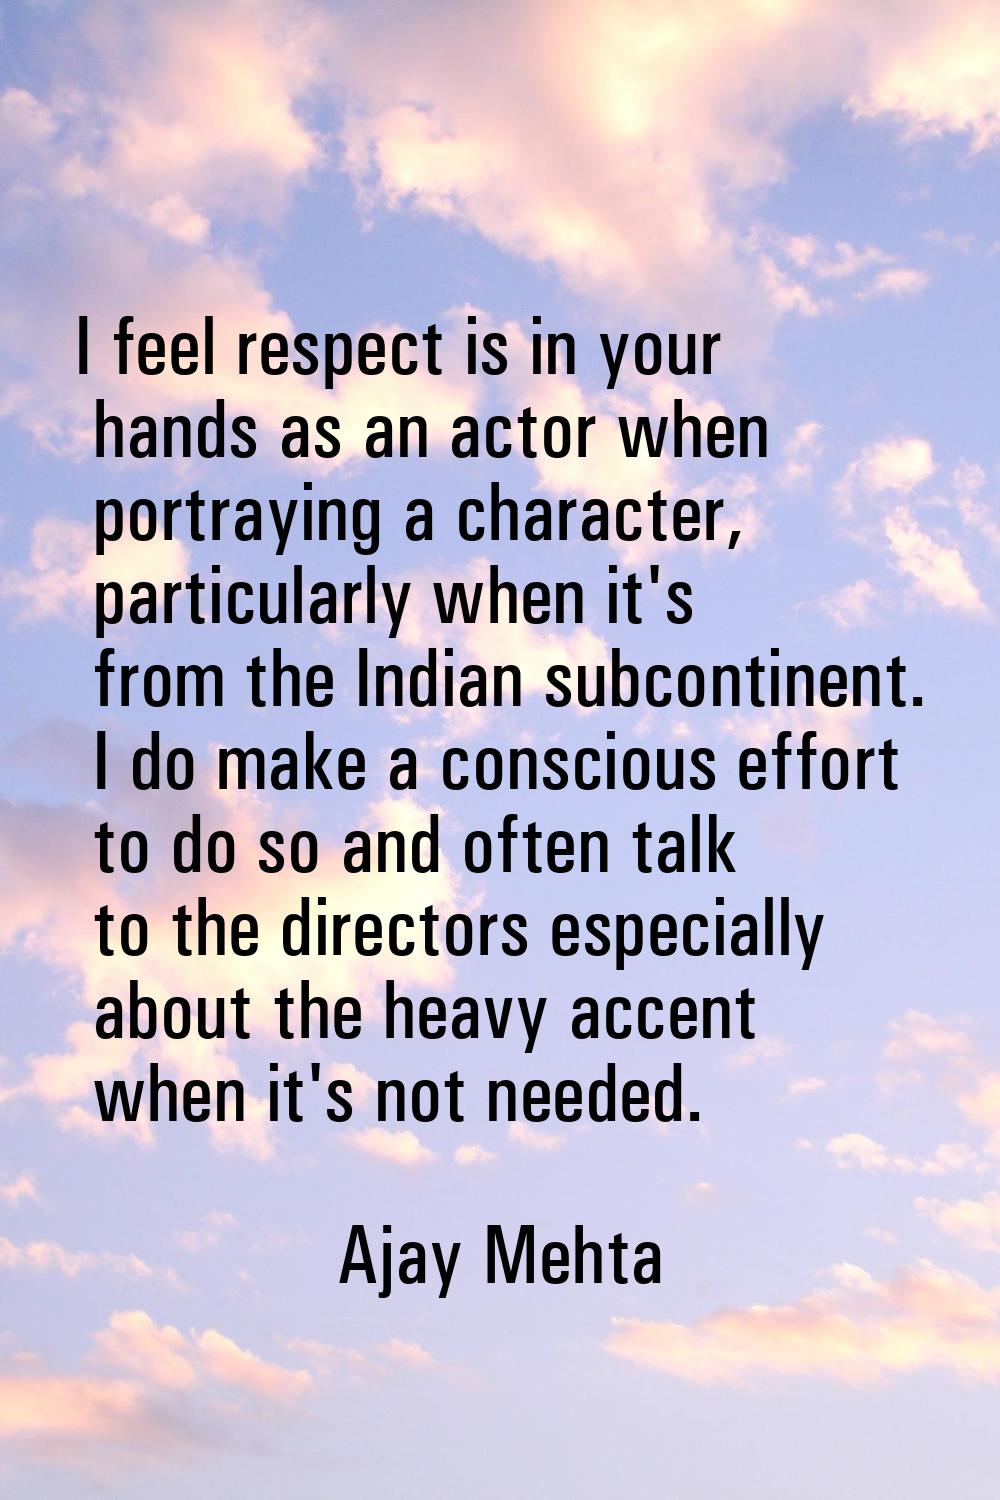 I feel respect is in your hands as an actor when portraying a character, particularly when it's fro